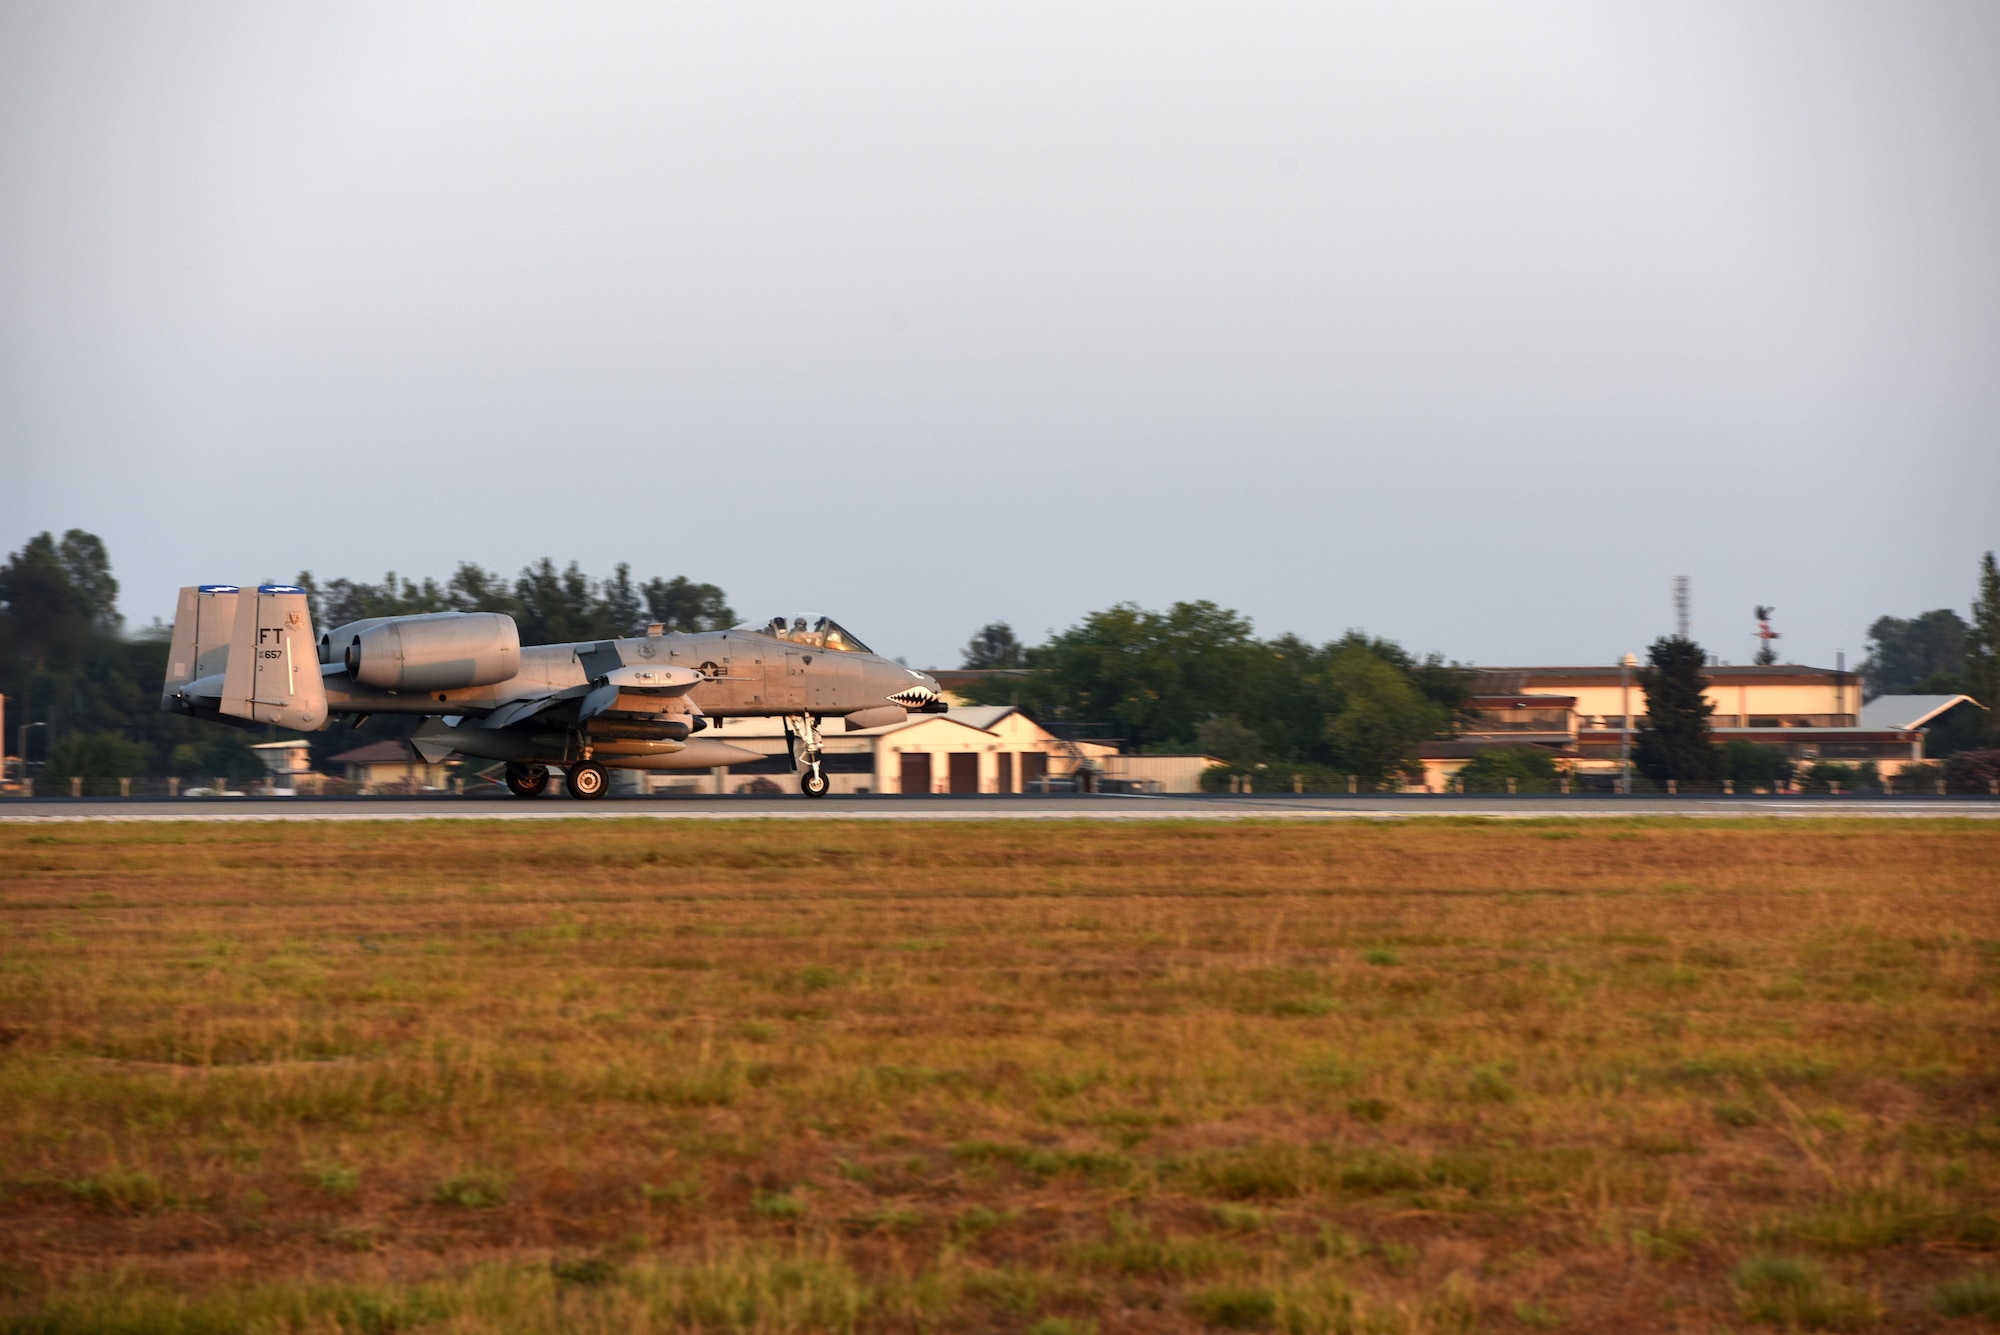 A U.S. Air Force A-10 Thunderbolt II taxis to a parking spot from the flight line July 15, 2017, at Incirlik Air Base, Turkey. The A-10s are deployed here from the 74th Fighter Squadron, Moody Air Force Base, Georgia, in support of Operation Inherent Resolve. (U.S. Air Force photo by Airman 1st Class Kristan Campbell)